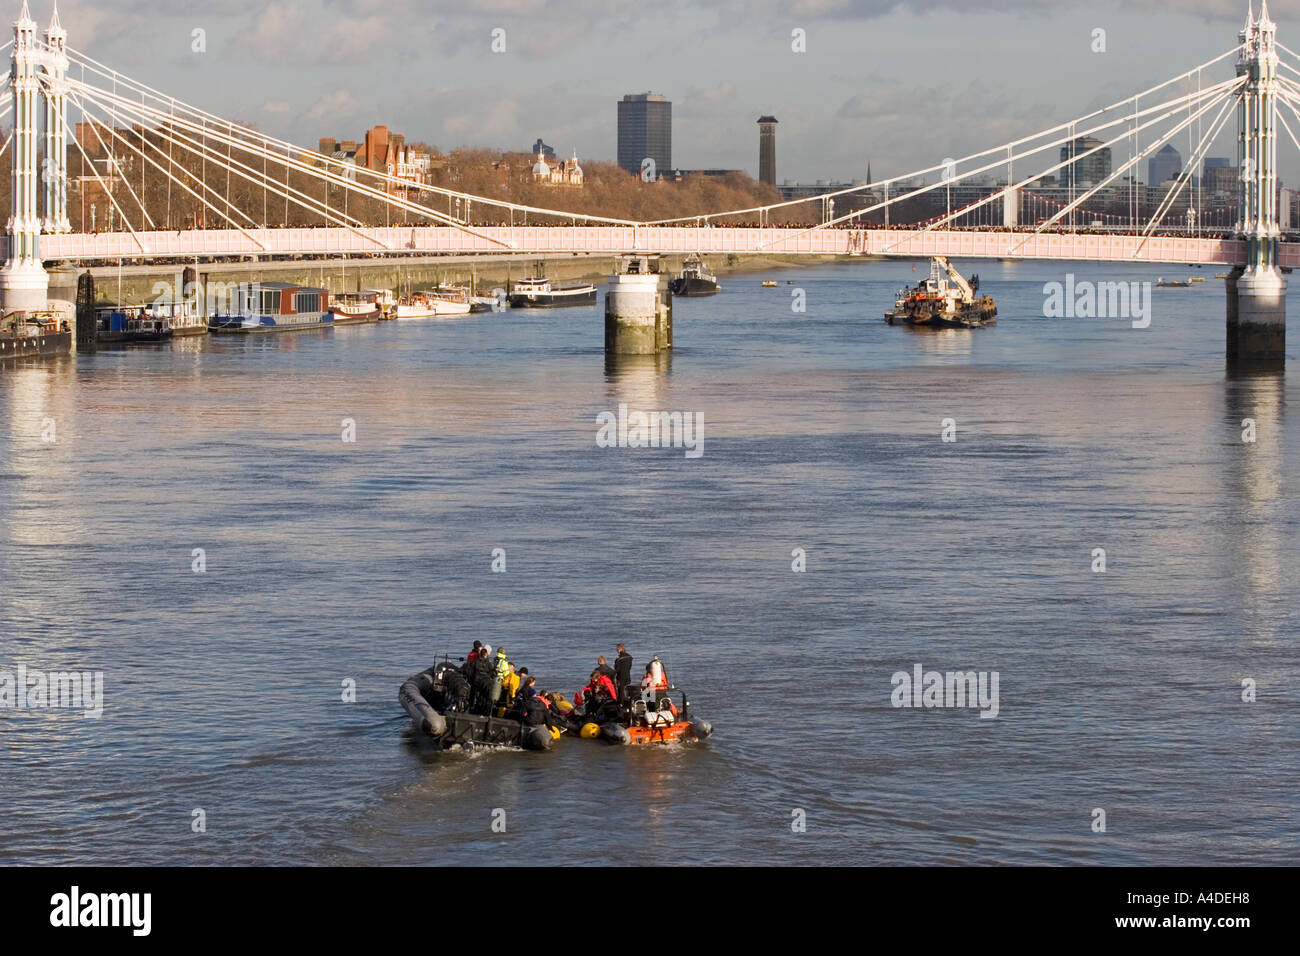 Crowds Watch Thames Whale Rescue Attempt - London Stock Photo